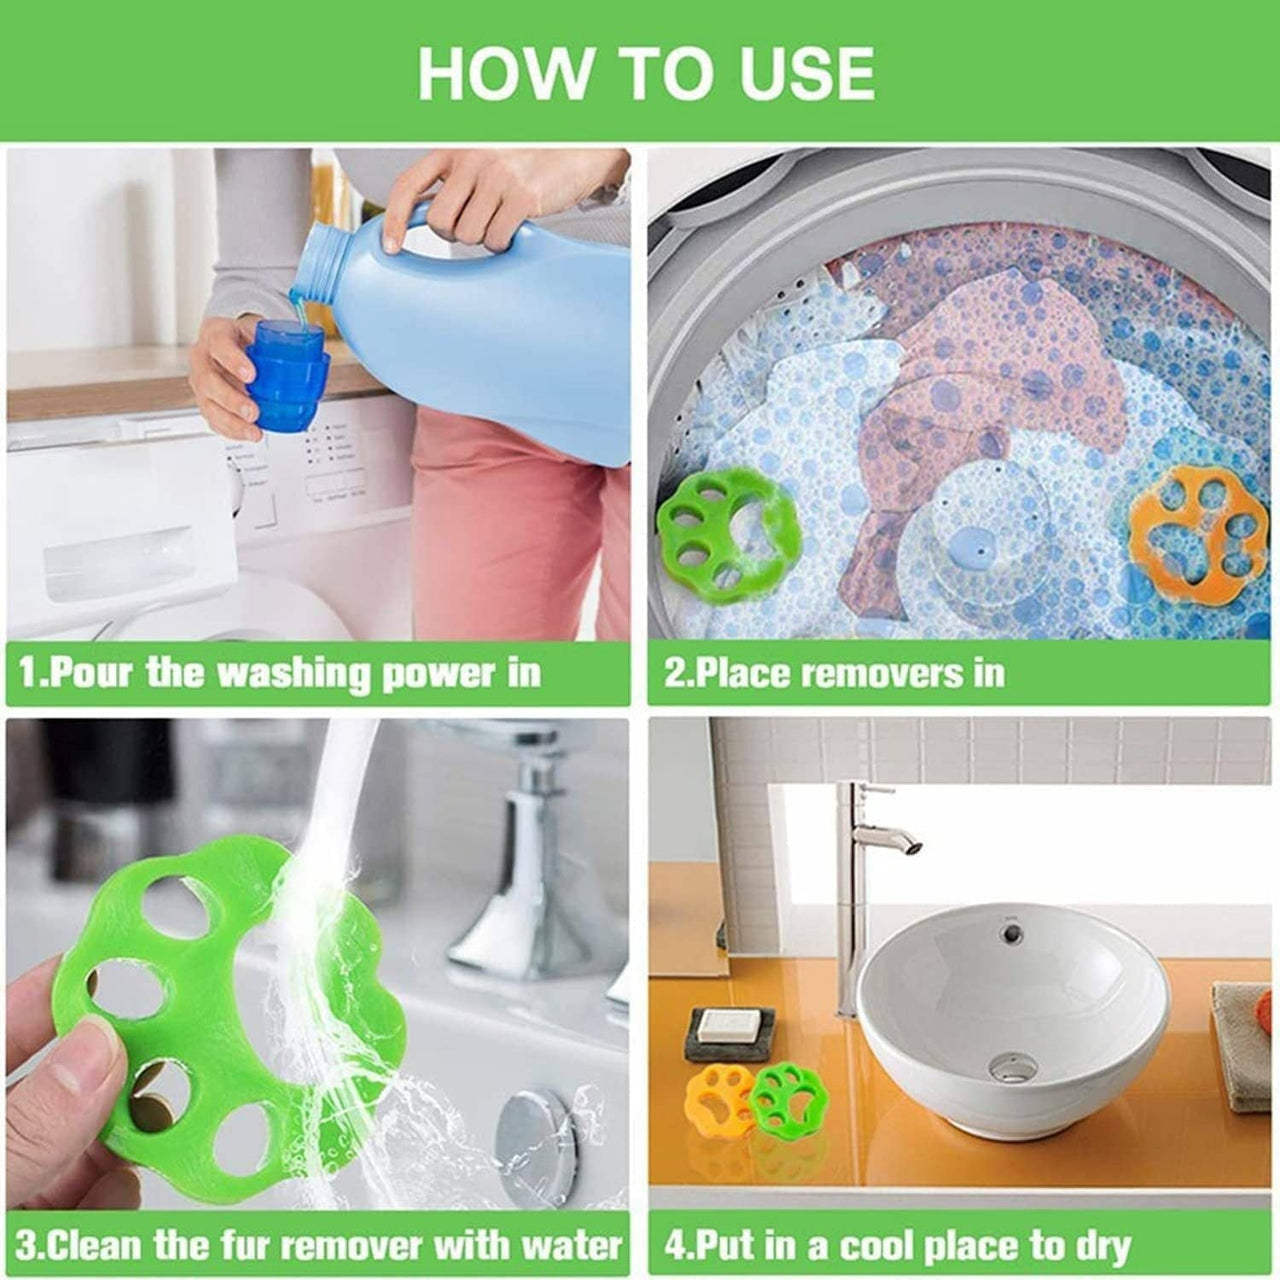 Pet Hair Remover Reusable Laundry Filter (Buy 1 Get 1 Free)